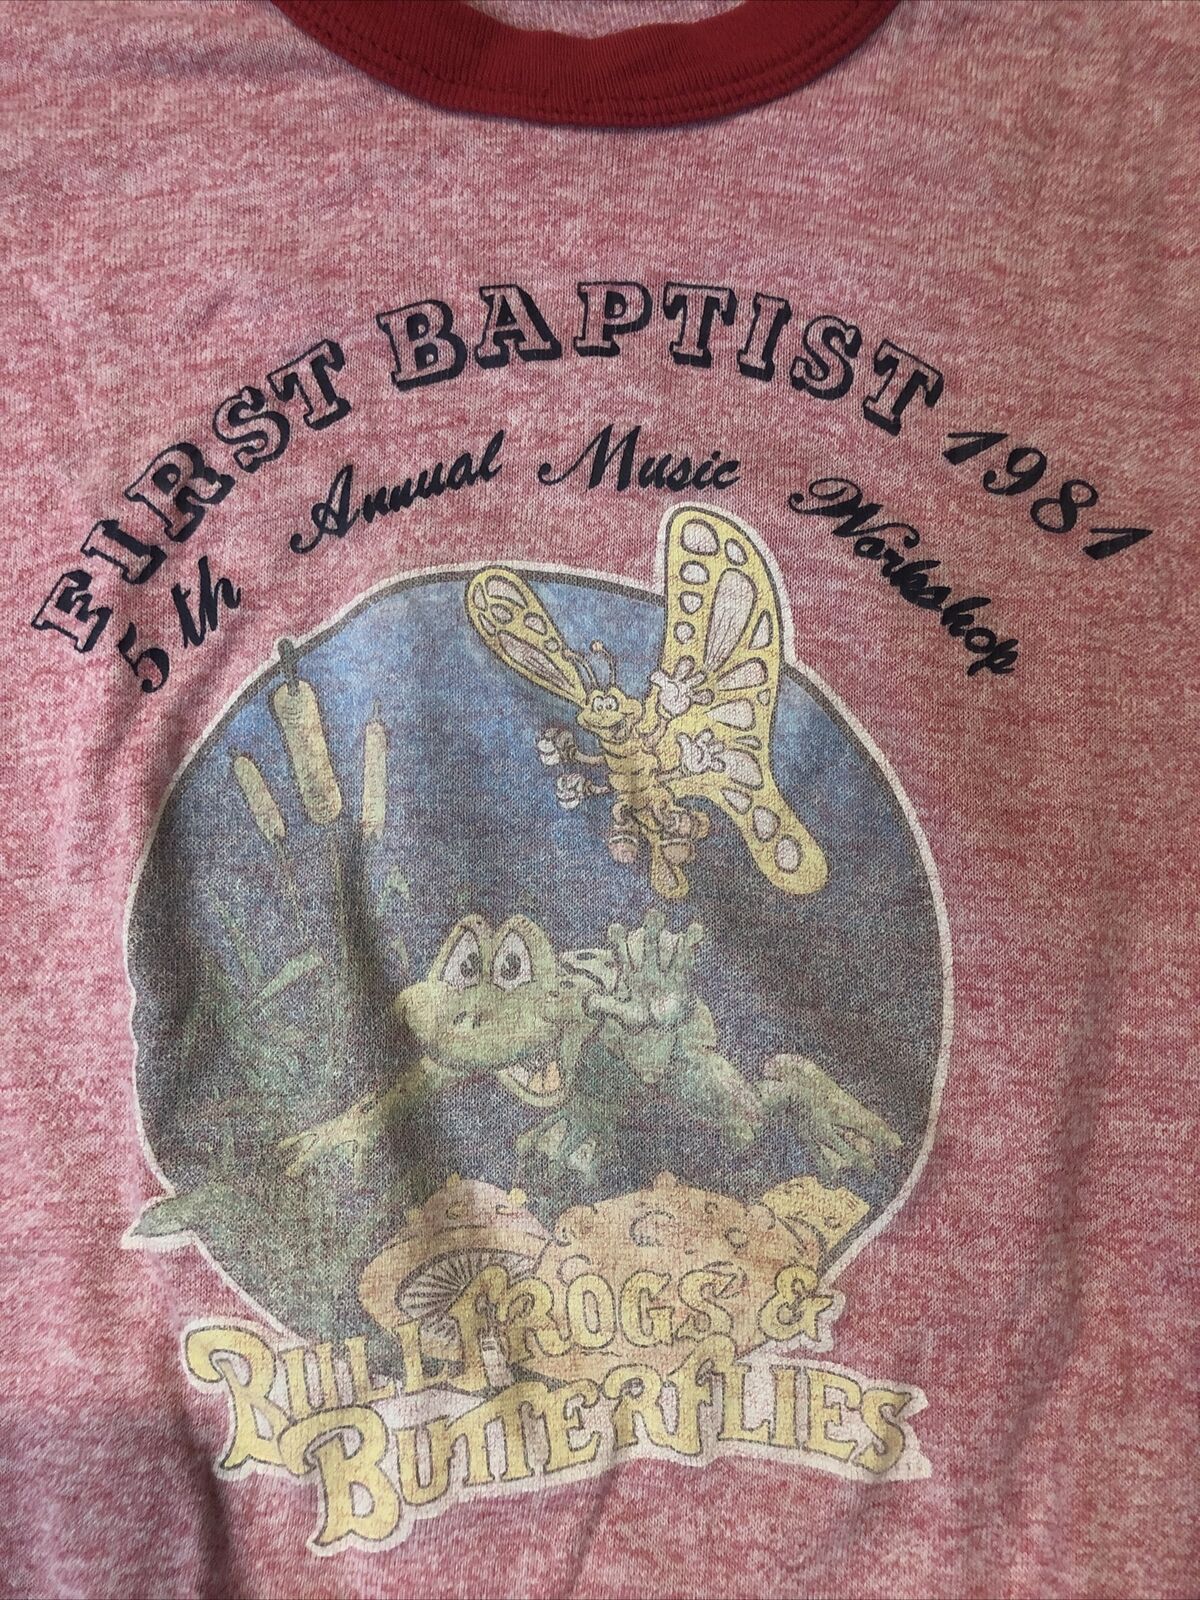 vintage 1981 first Baptist T-shirt youth size large bullfrogs butterflies